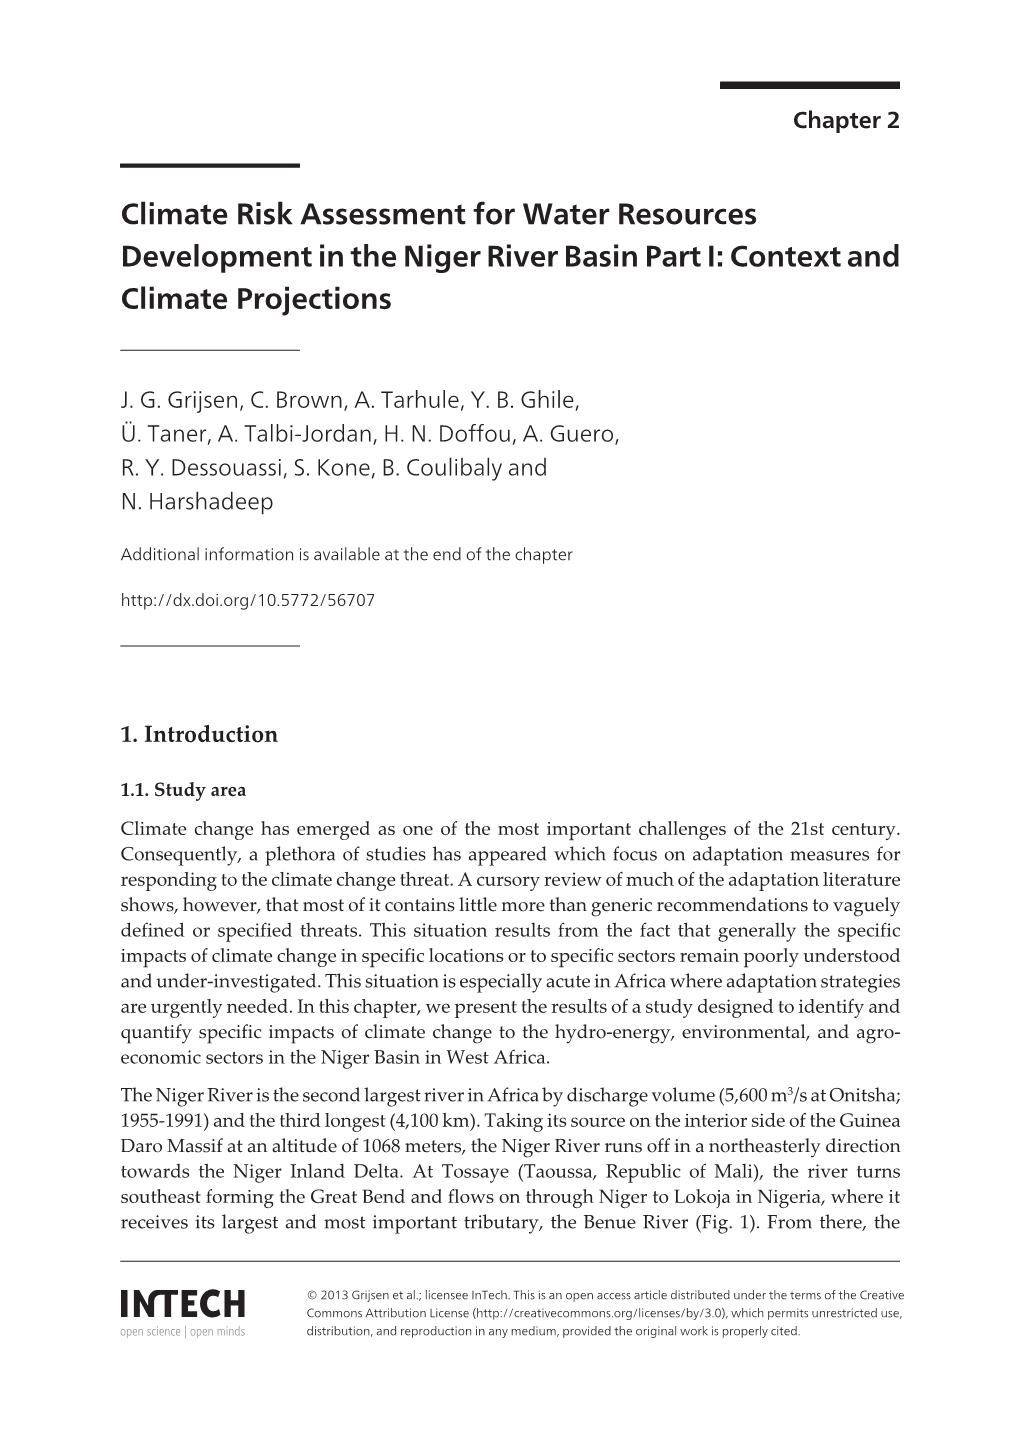 Climate Risk Assessment for Water Resources Development in the Niger River Basin Part I: Context and Climate Projections